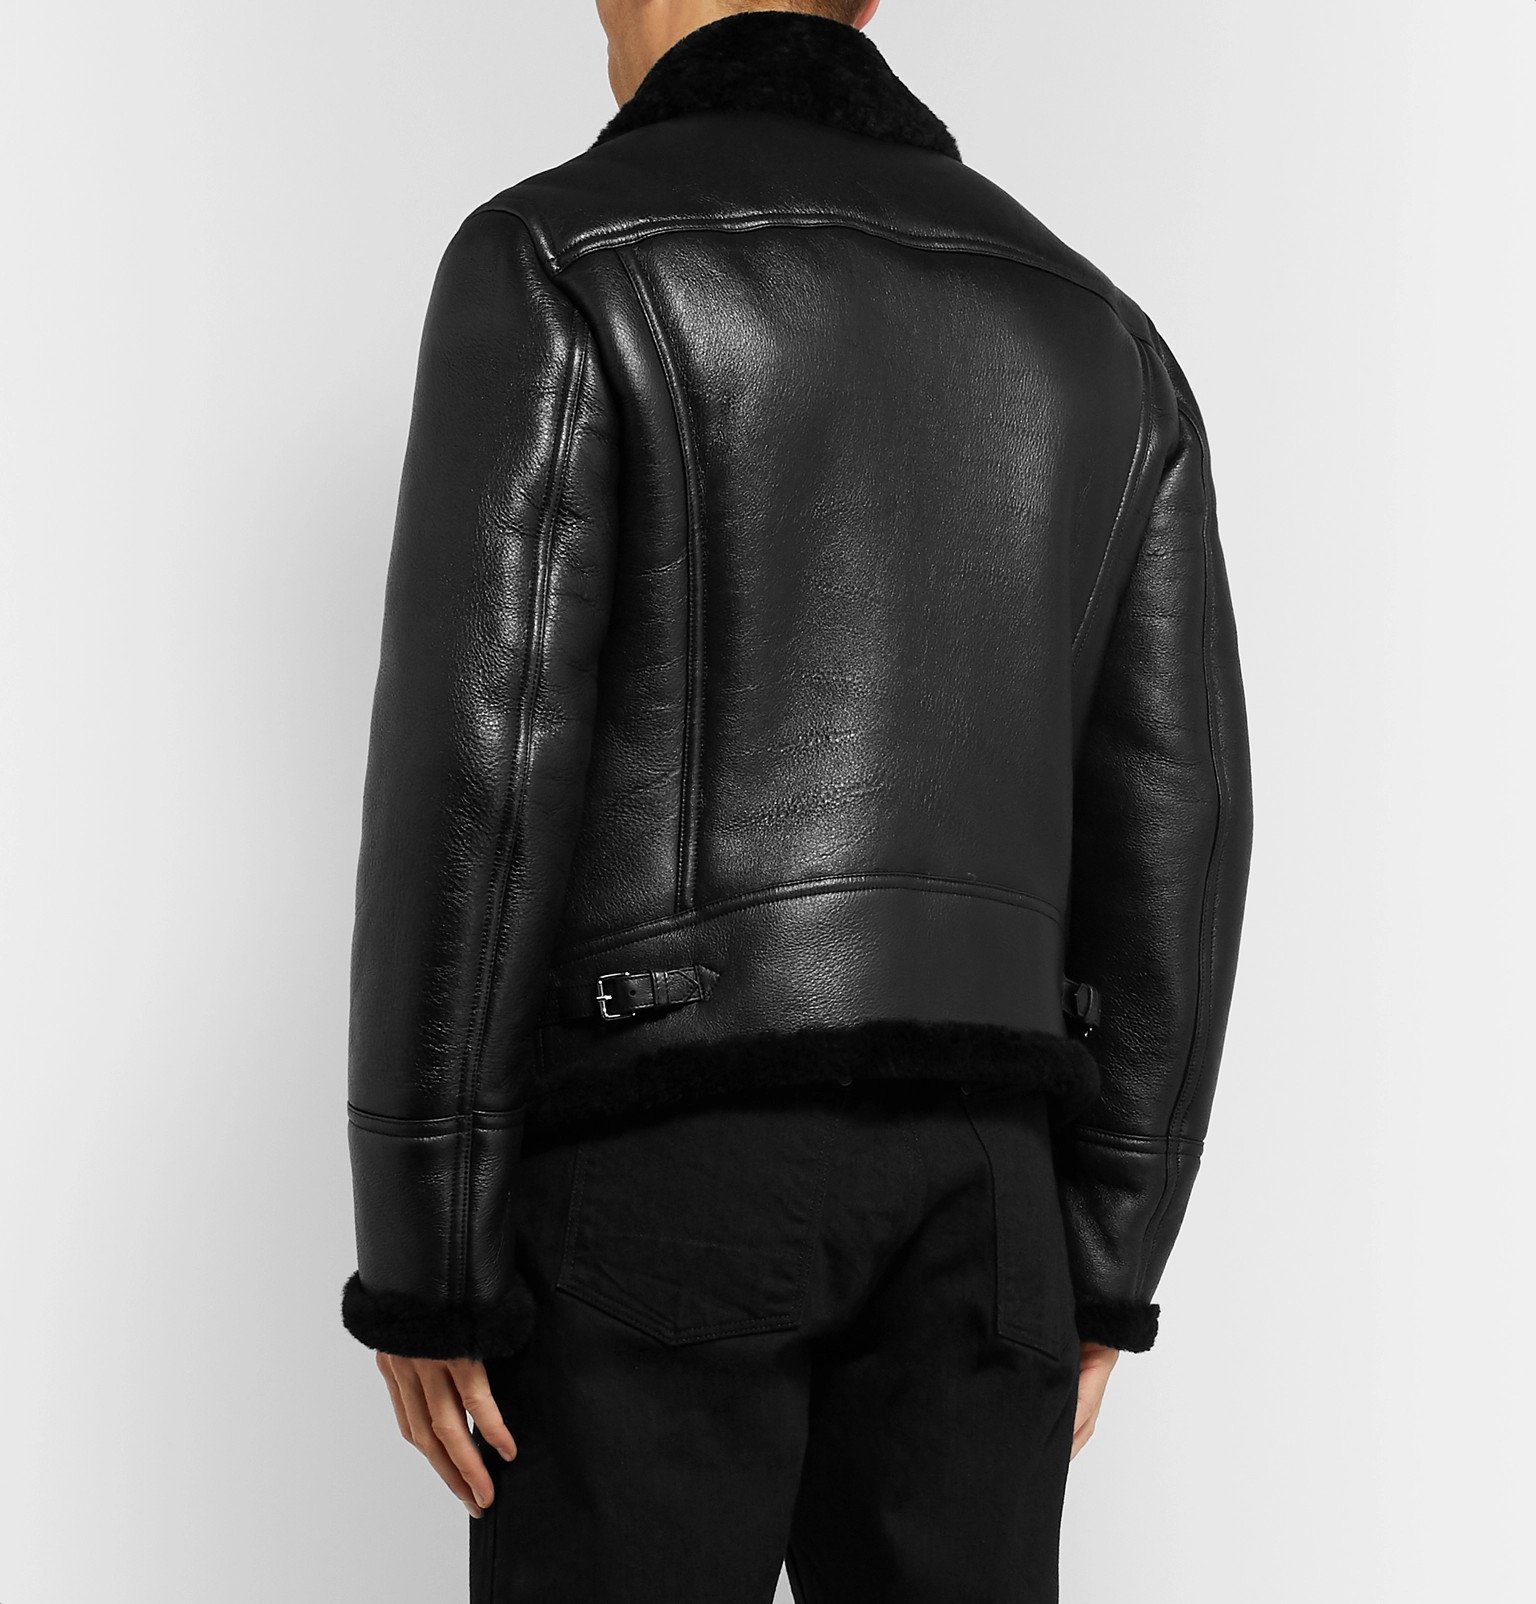 TOM FORD - Shearling-Lined Leather Aviator Jacket - Black TOM FORD